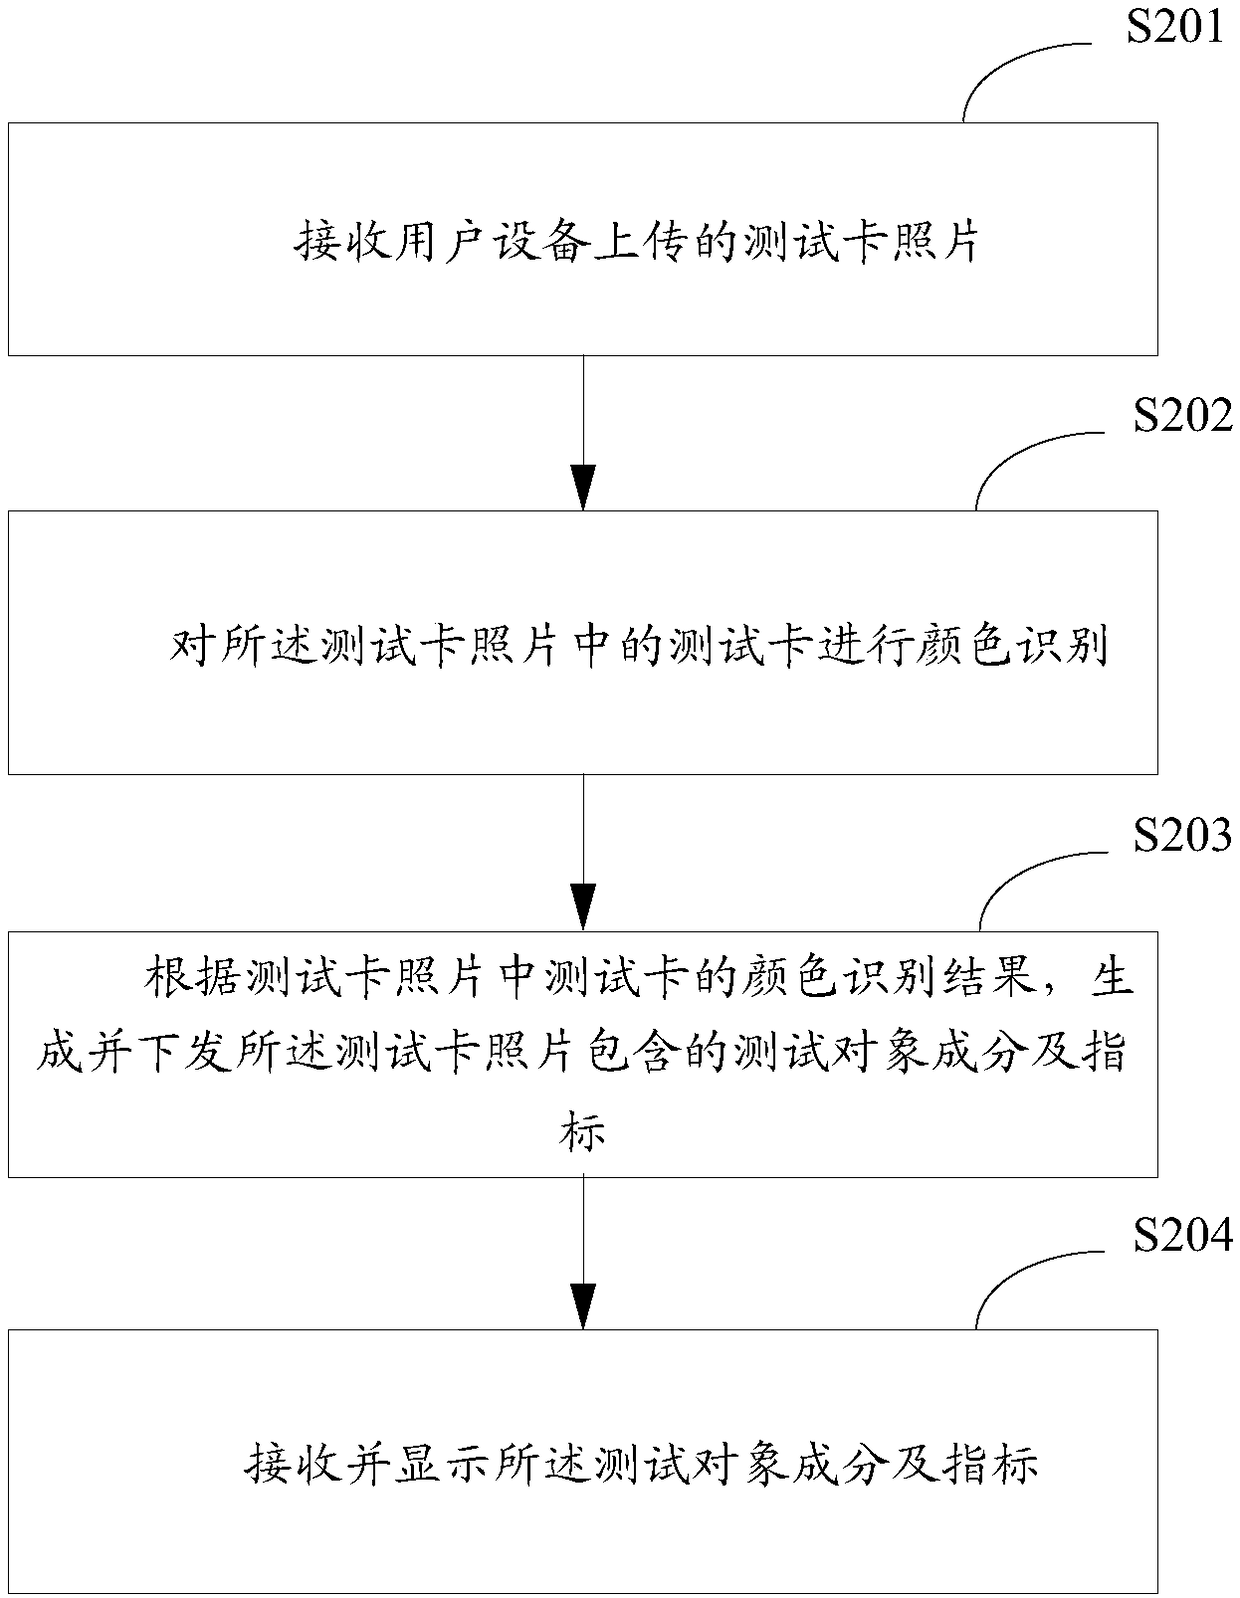 Image recognition system and image recognition method